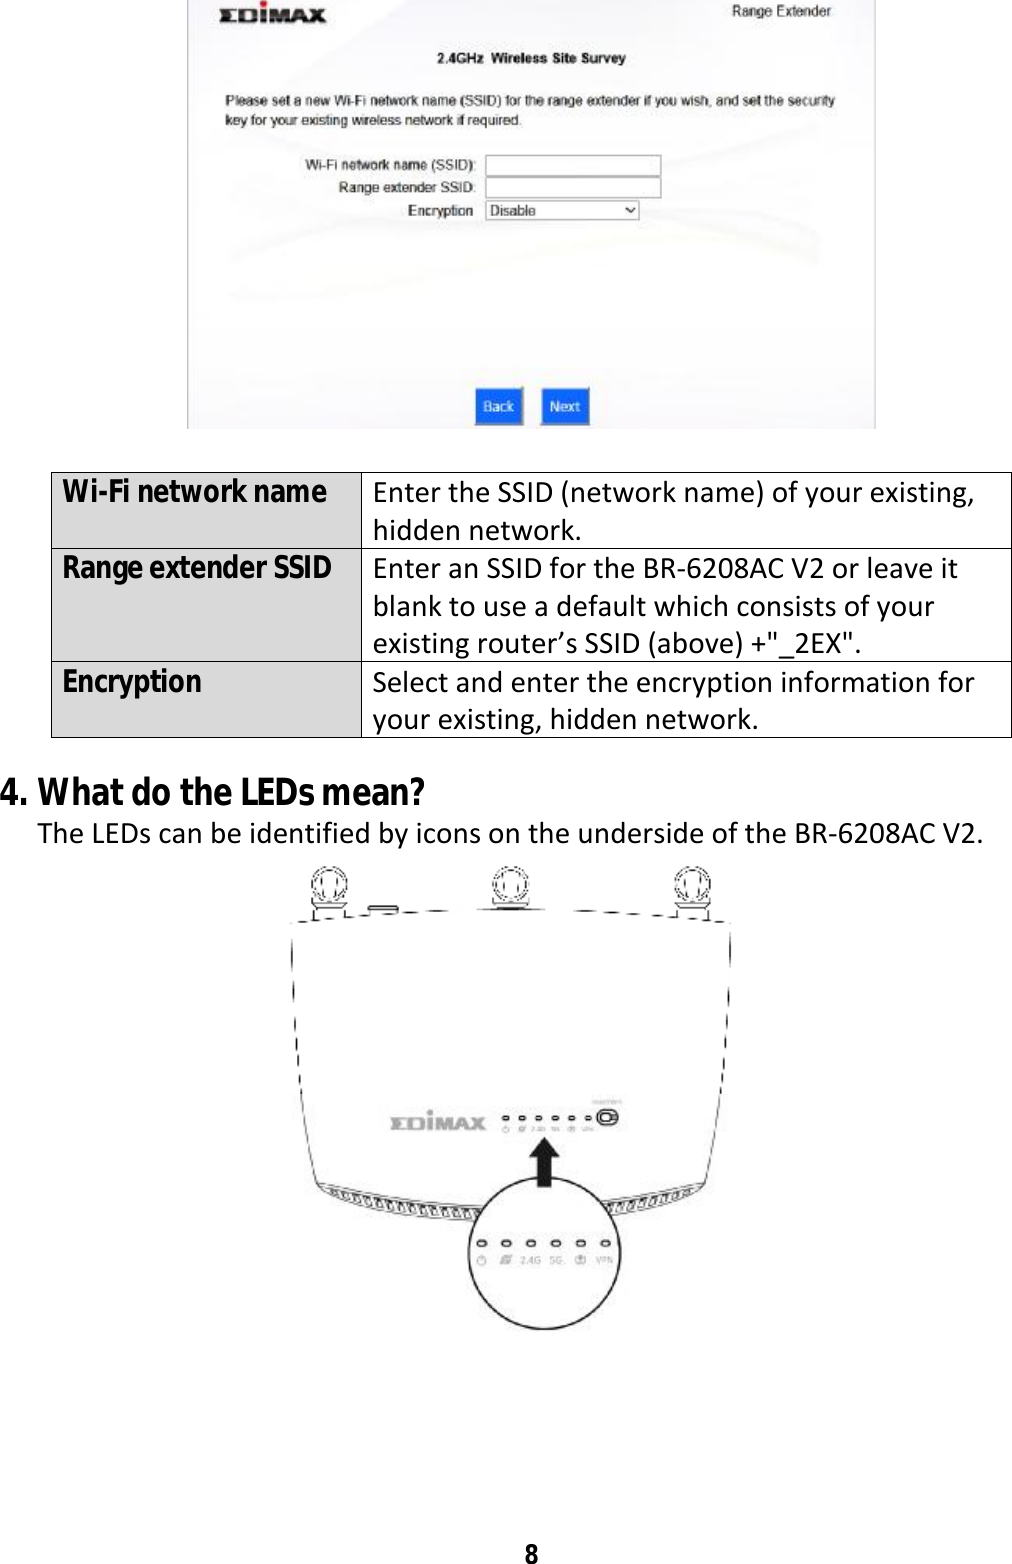 8   Wi-Fi network name  Enter the SSID (network name) of your existing, hidden network. Range extender SSID  Enter an SSID for the BR-6208AC V2 or leave it blank to use a default which consists of your existing router’s SSID (above) +&quot;_2EX&quot;. Encryption  Select and enter the encryption information for your existing, hidden network.  4. What do the LEDs mean? The LEDs can be identified by icons on the underside of the BR-6208AC V2.  